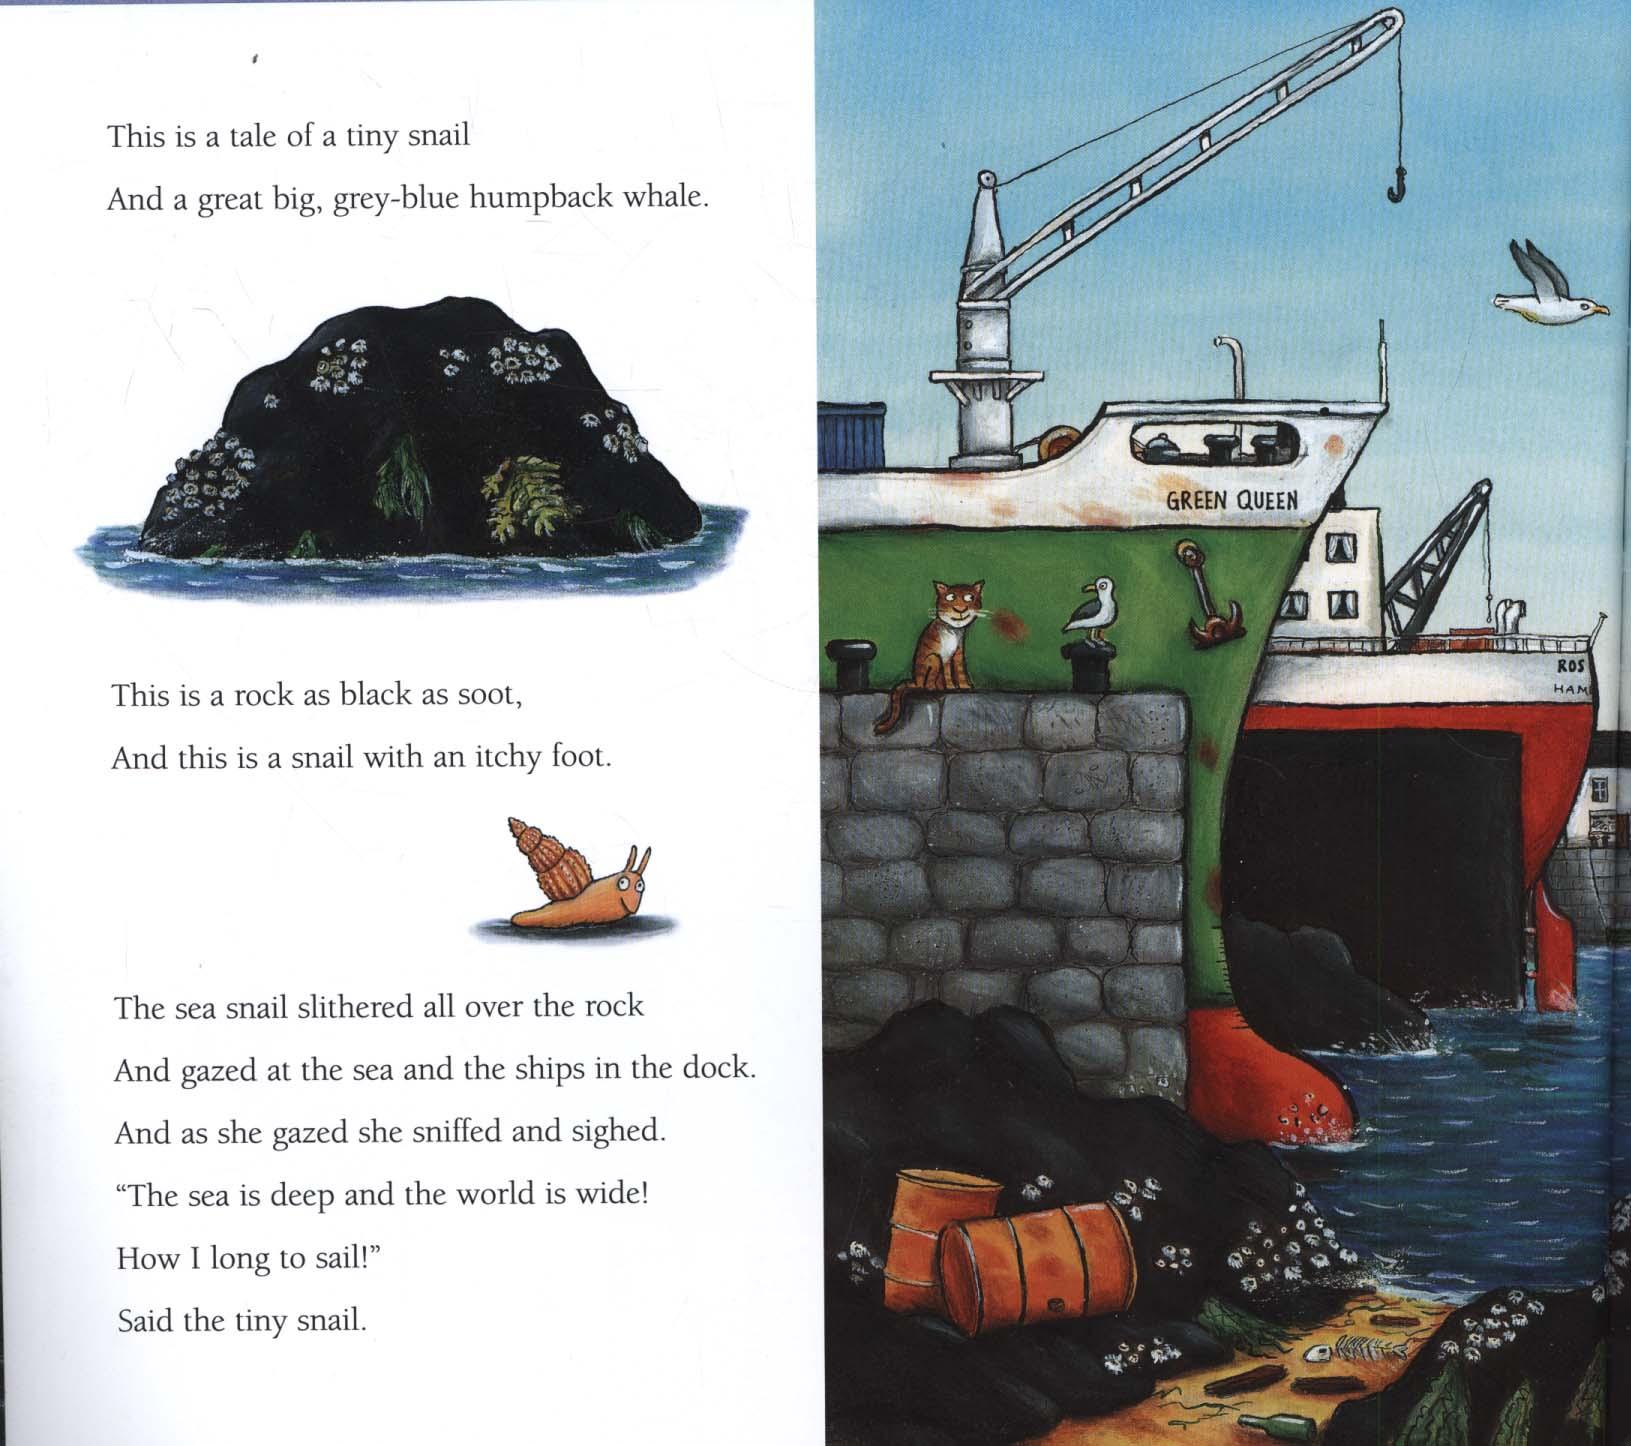 Snail and the Whale 15th Anniversary Edition